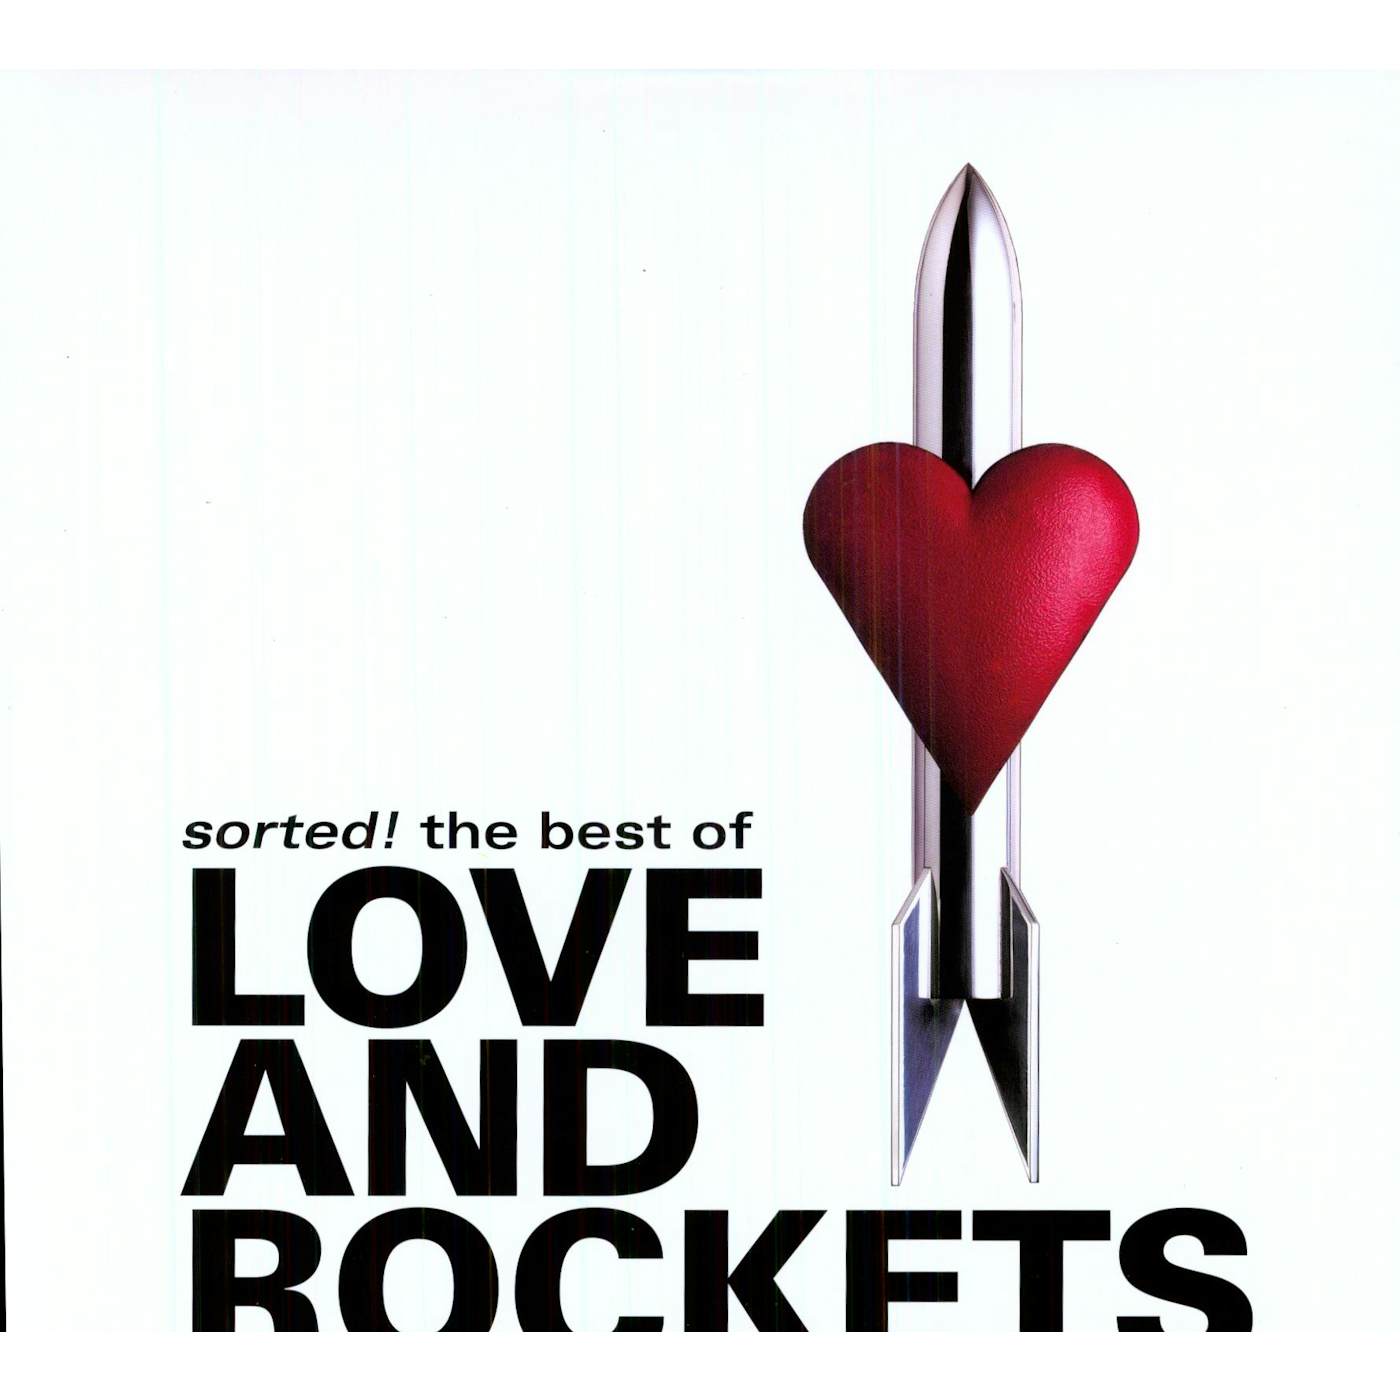 SORTED! THE BEST OF Love and Rockets (UK) (Vinyl)